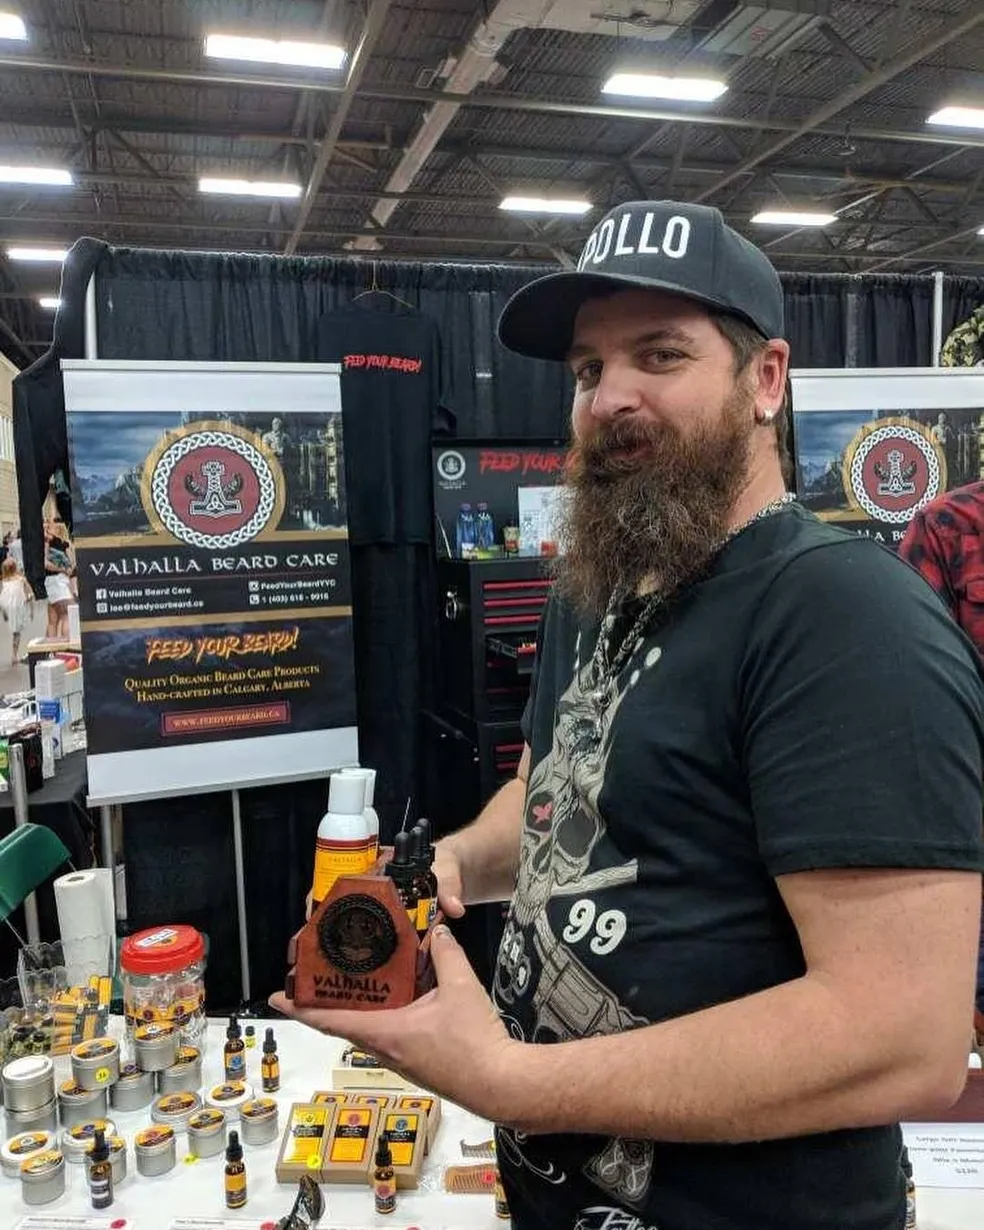 A man holding a bottle of honey at an event.